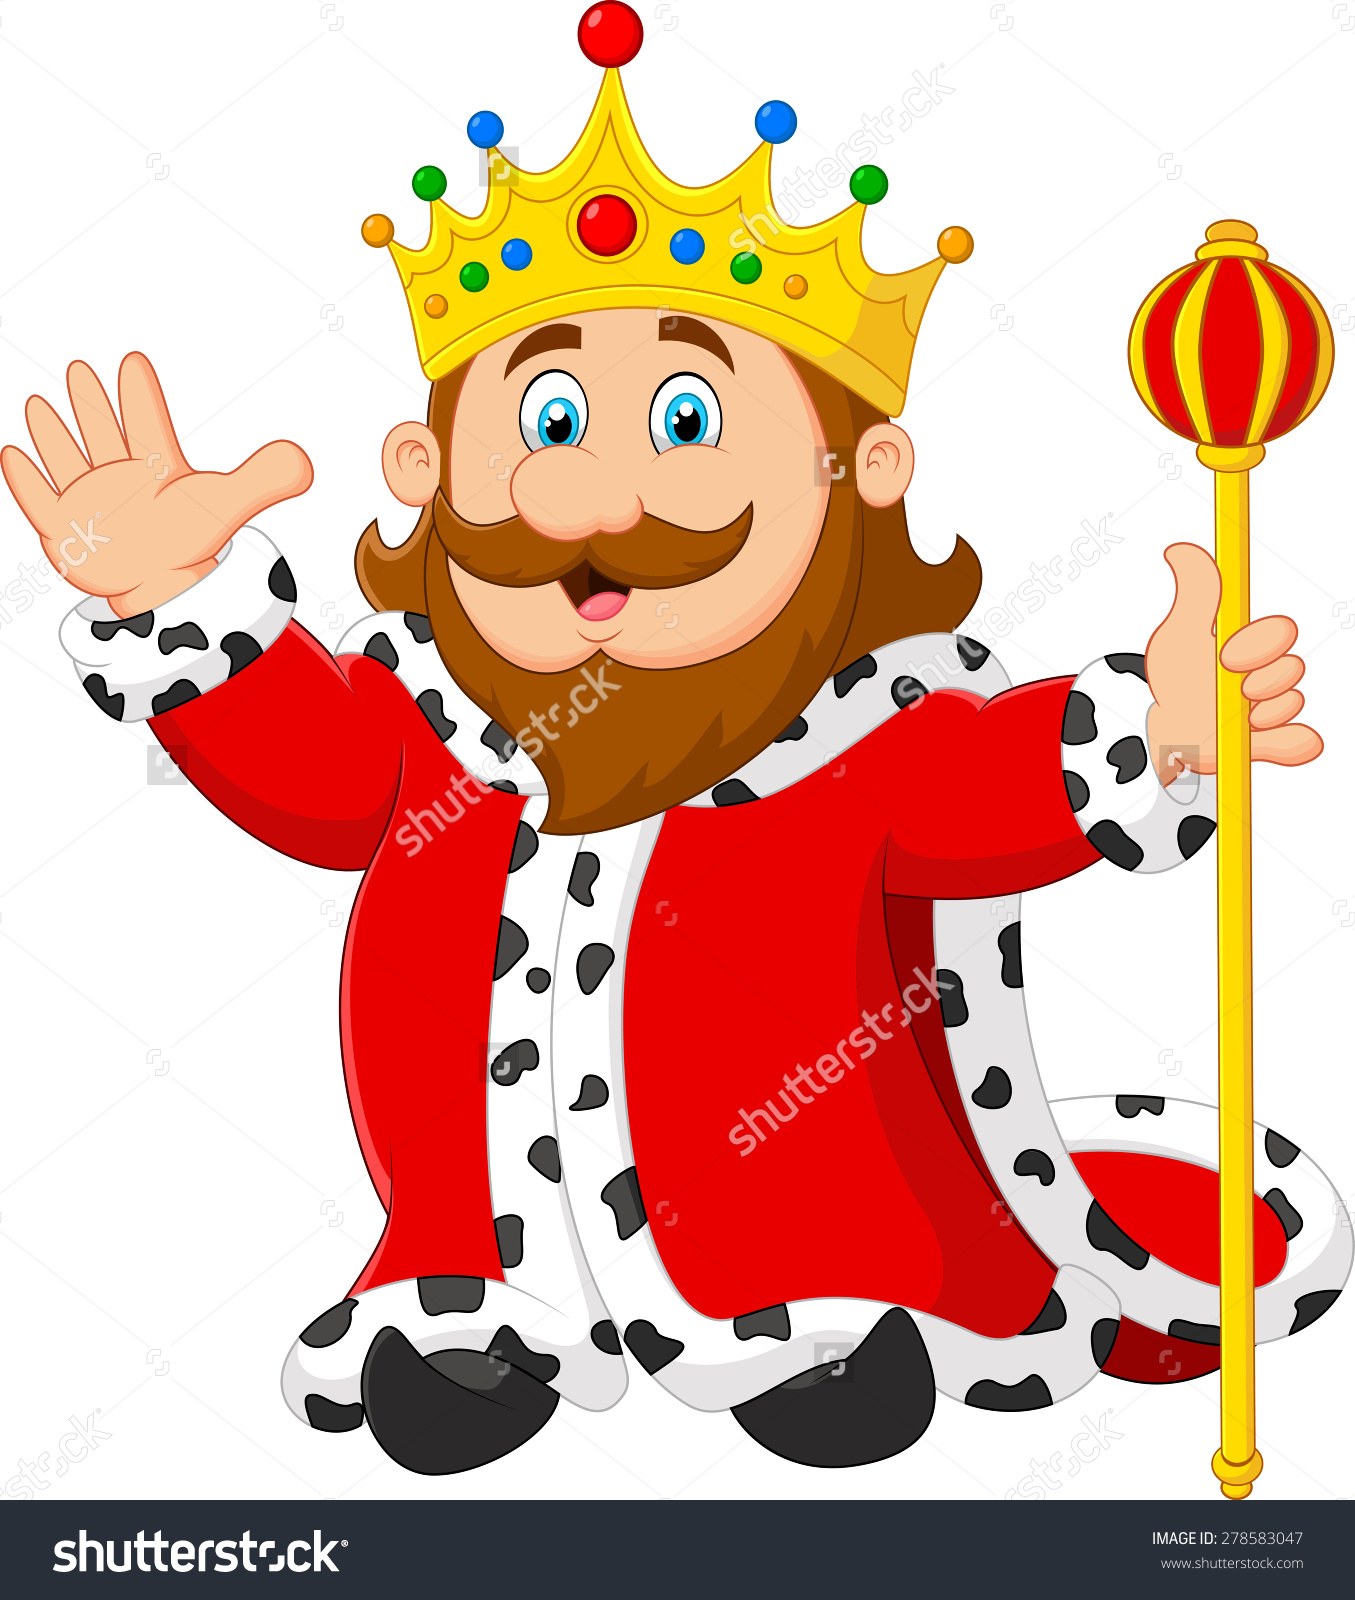 clipart of a king - photo #13